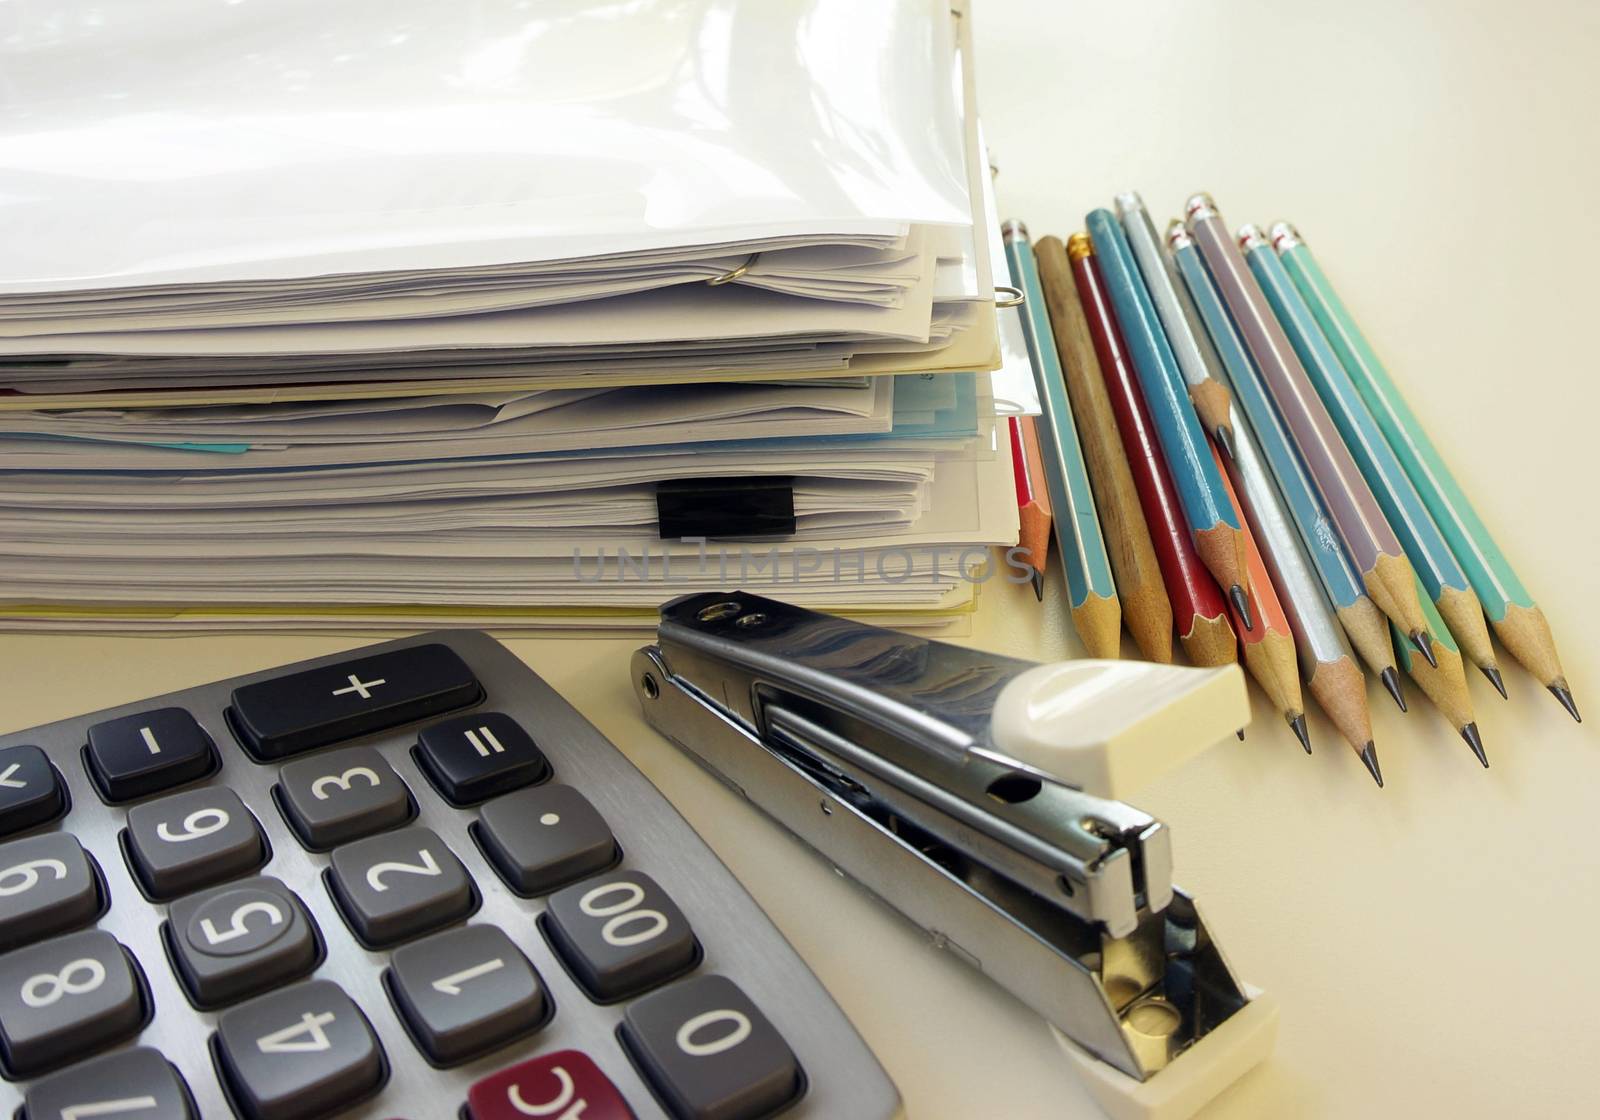 Office report and office equipment, such as calculators, pencil and staples placed on the desk.                               